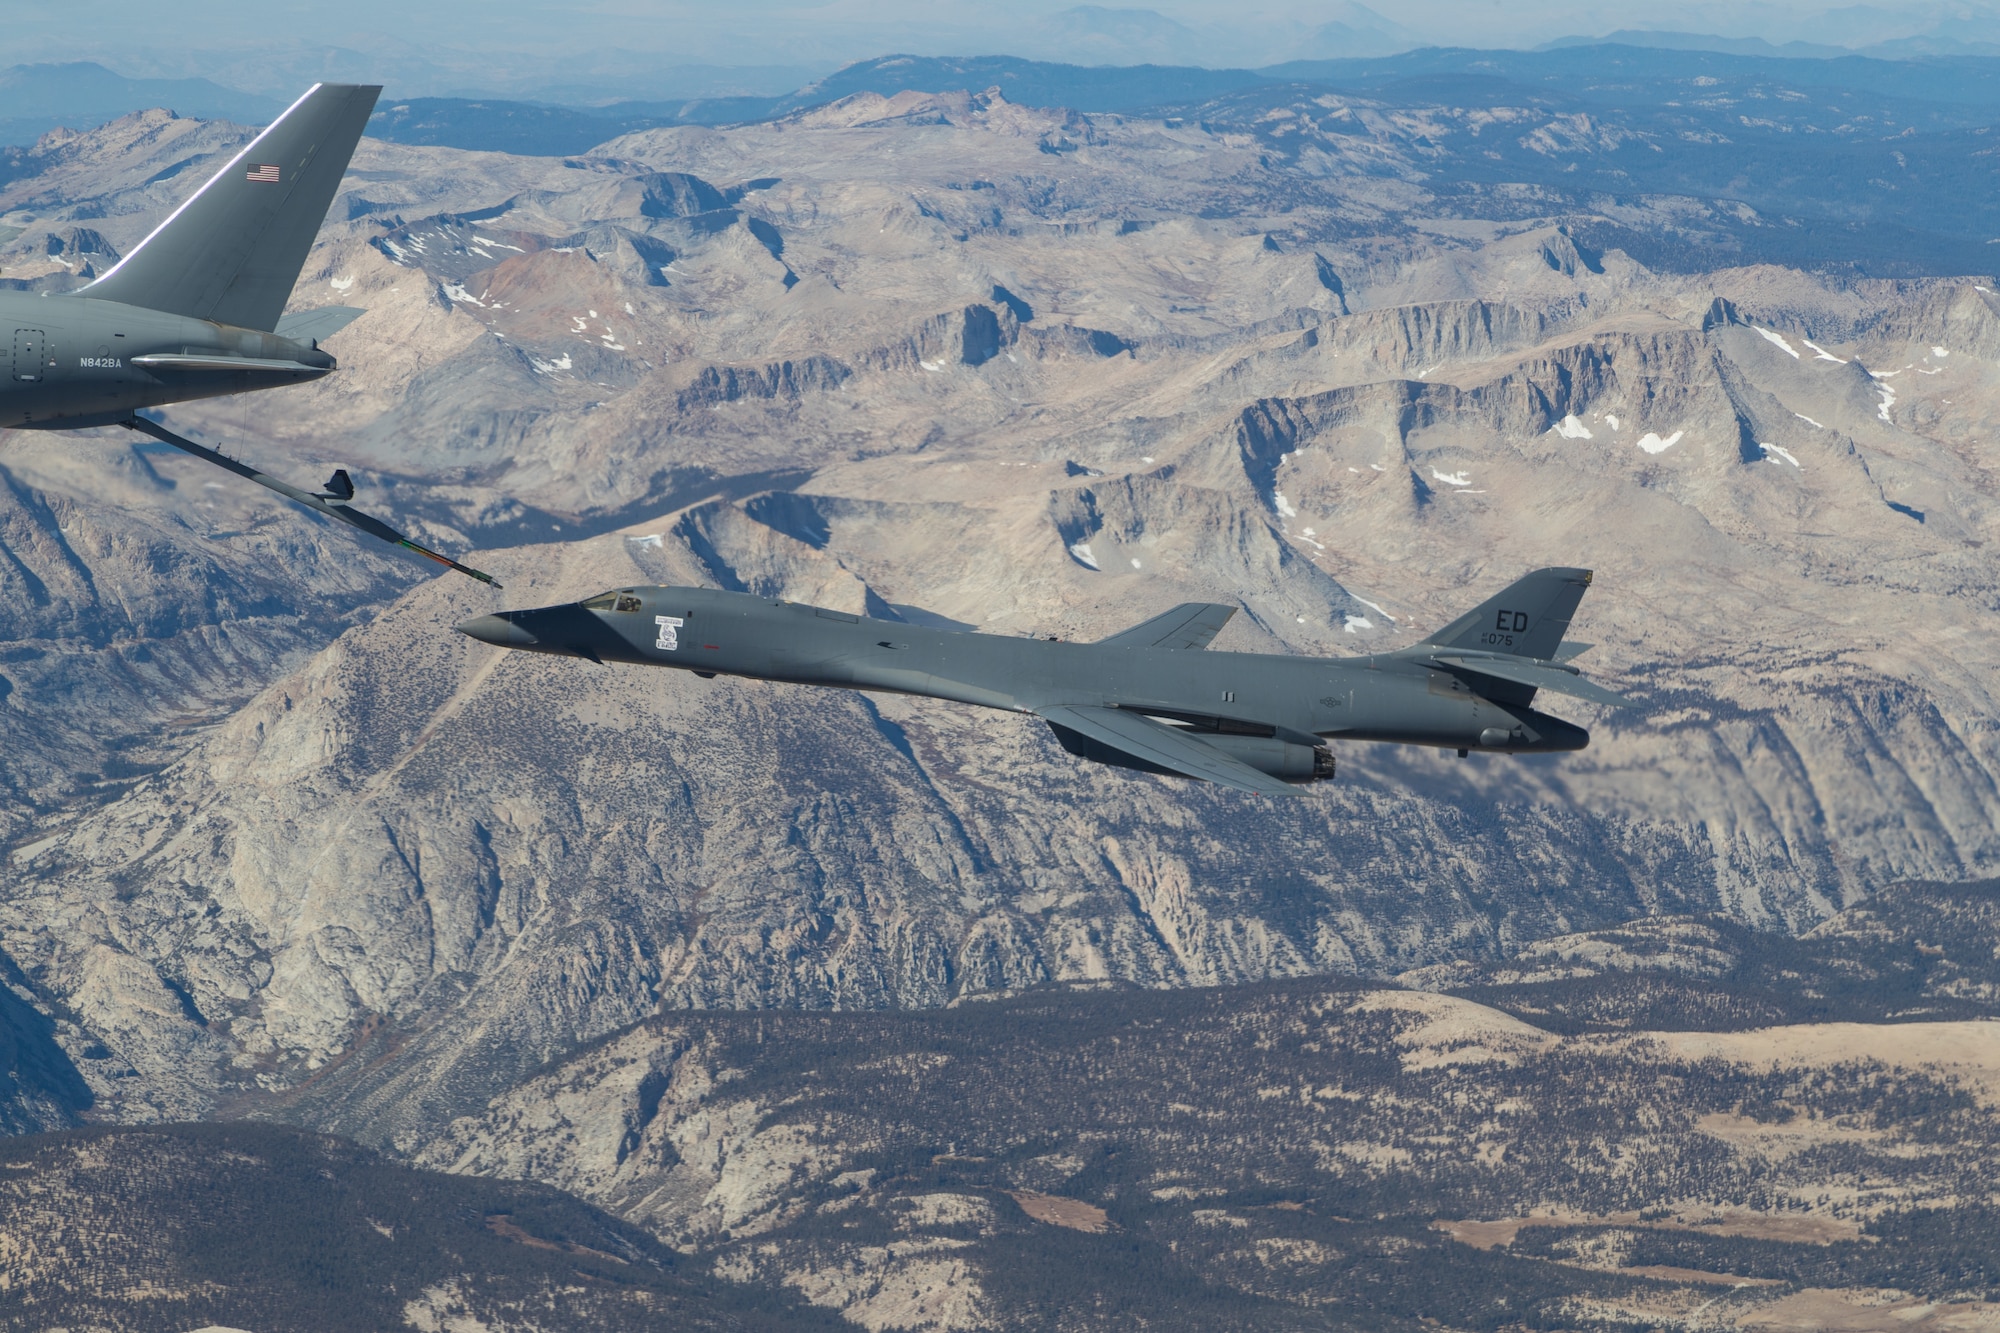 The B-1B Lancer conducted aerial testing with the KC-46 Pegasus in the skies over Edwards Air Force Base, California, recently. (Air Force photo by Don Allen)